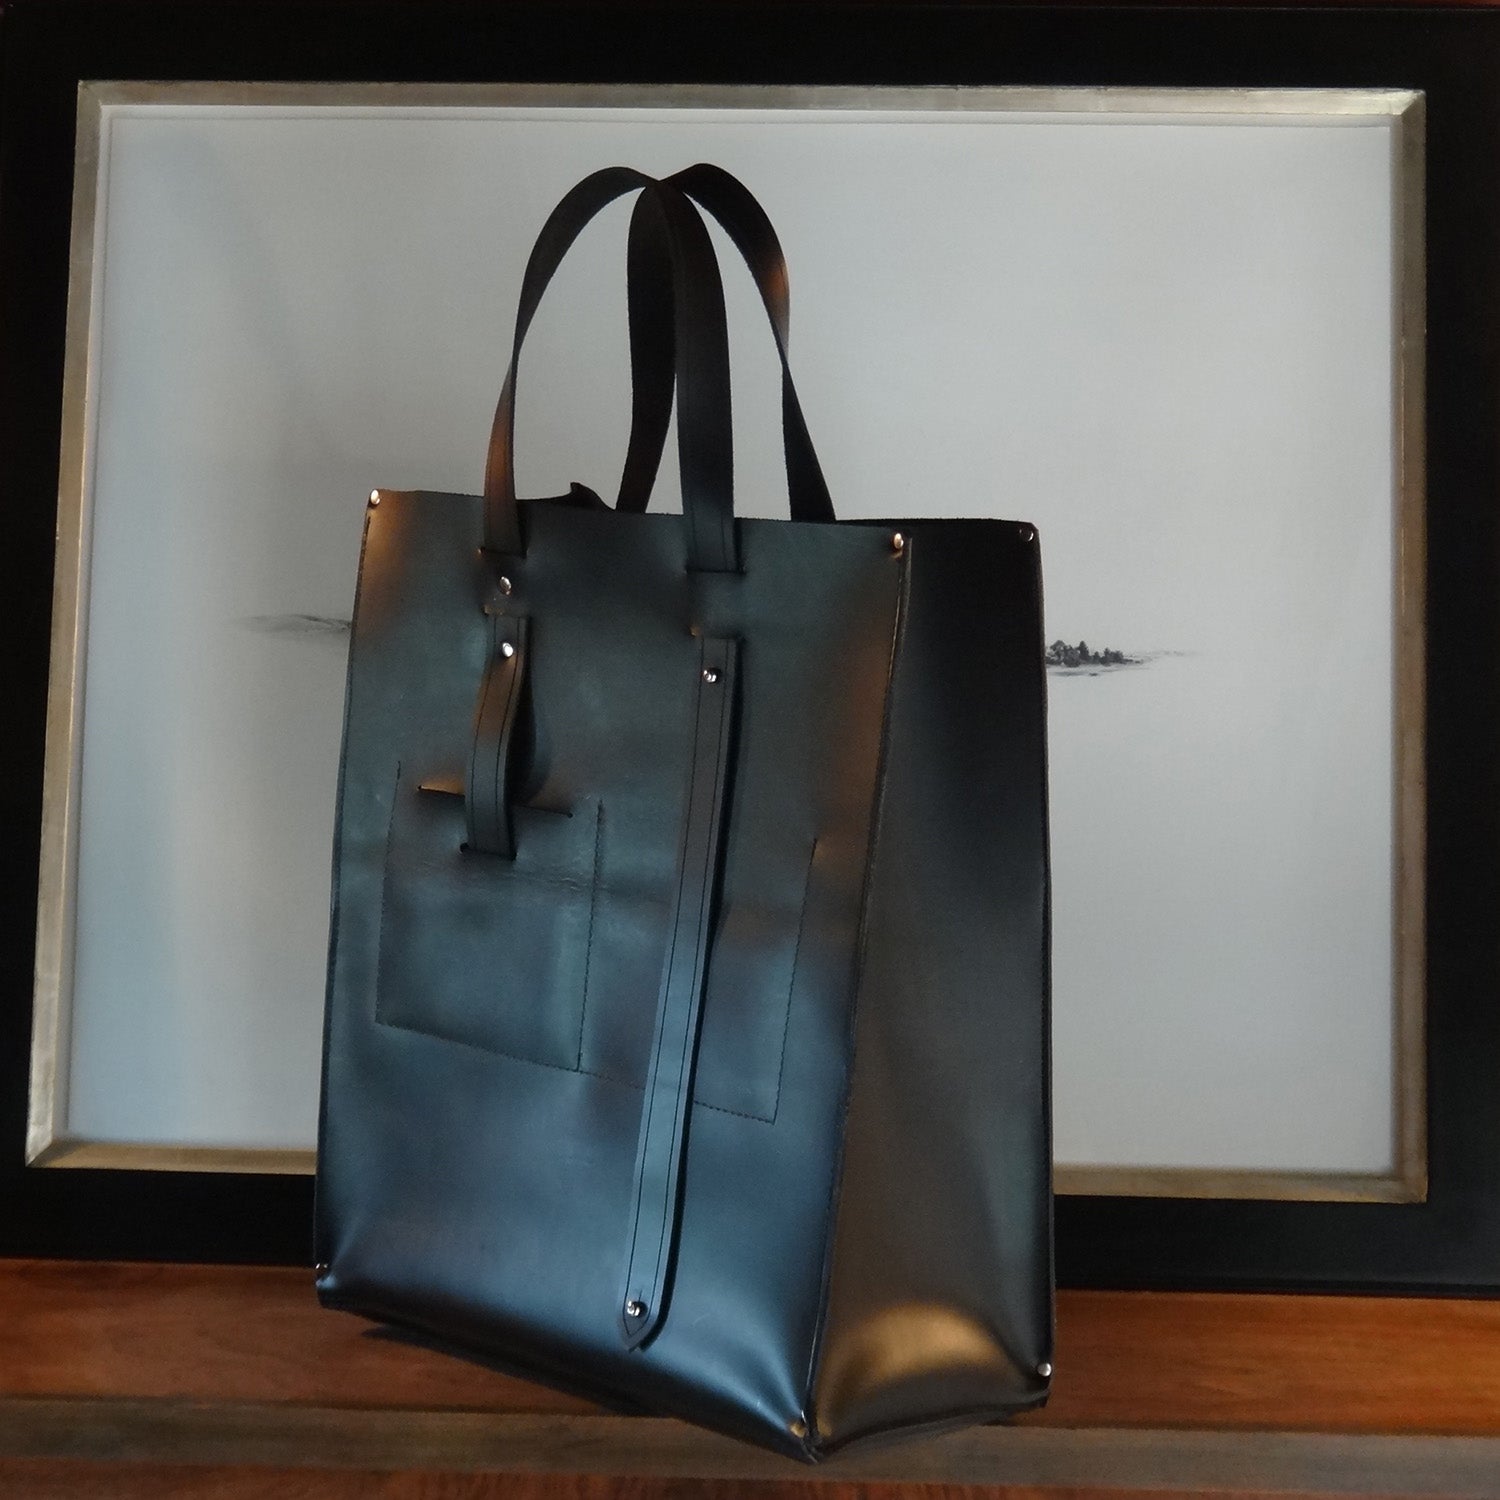 Leather Bag For Man price ;Rs 2150 - Helping Shop Nepal